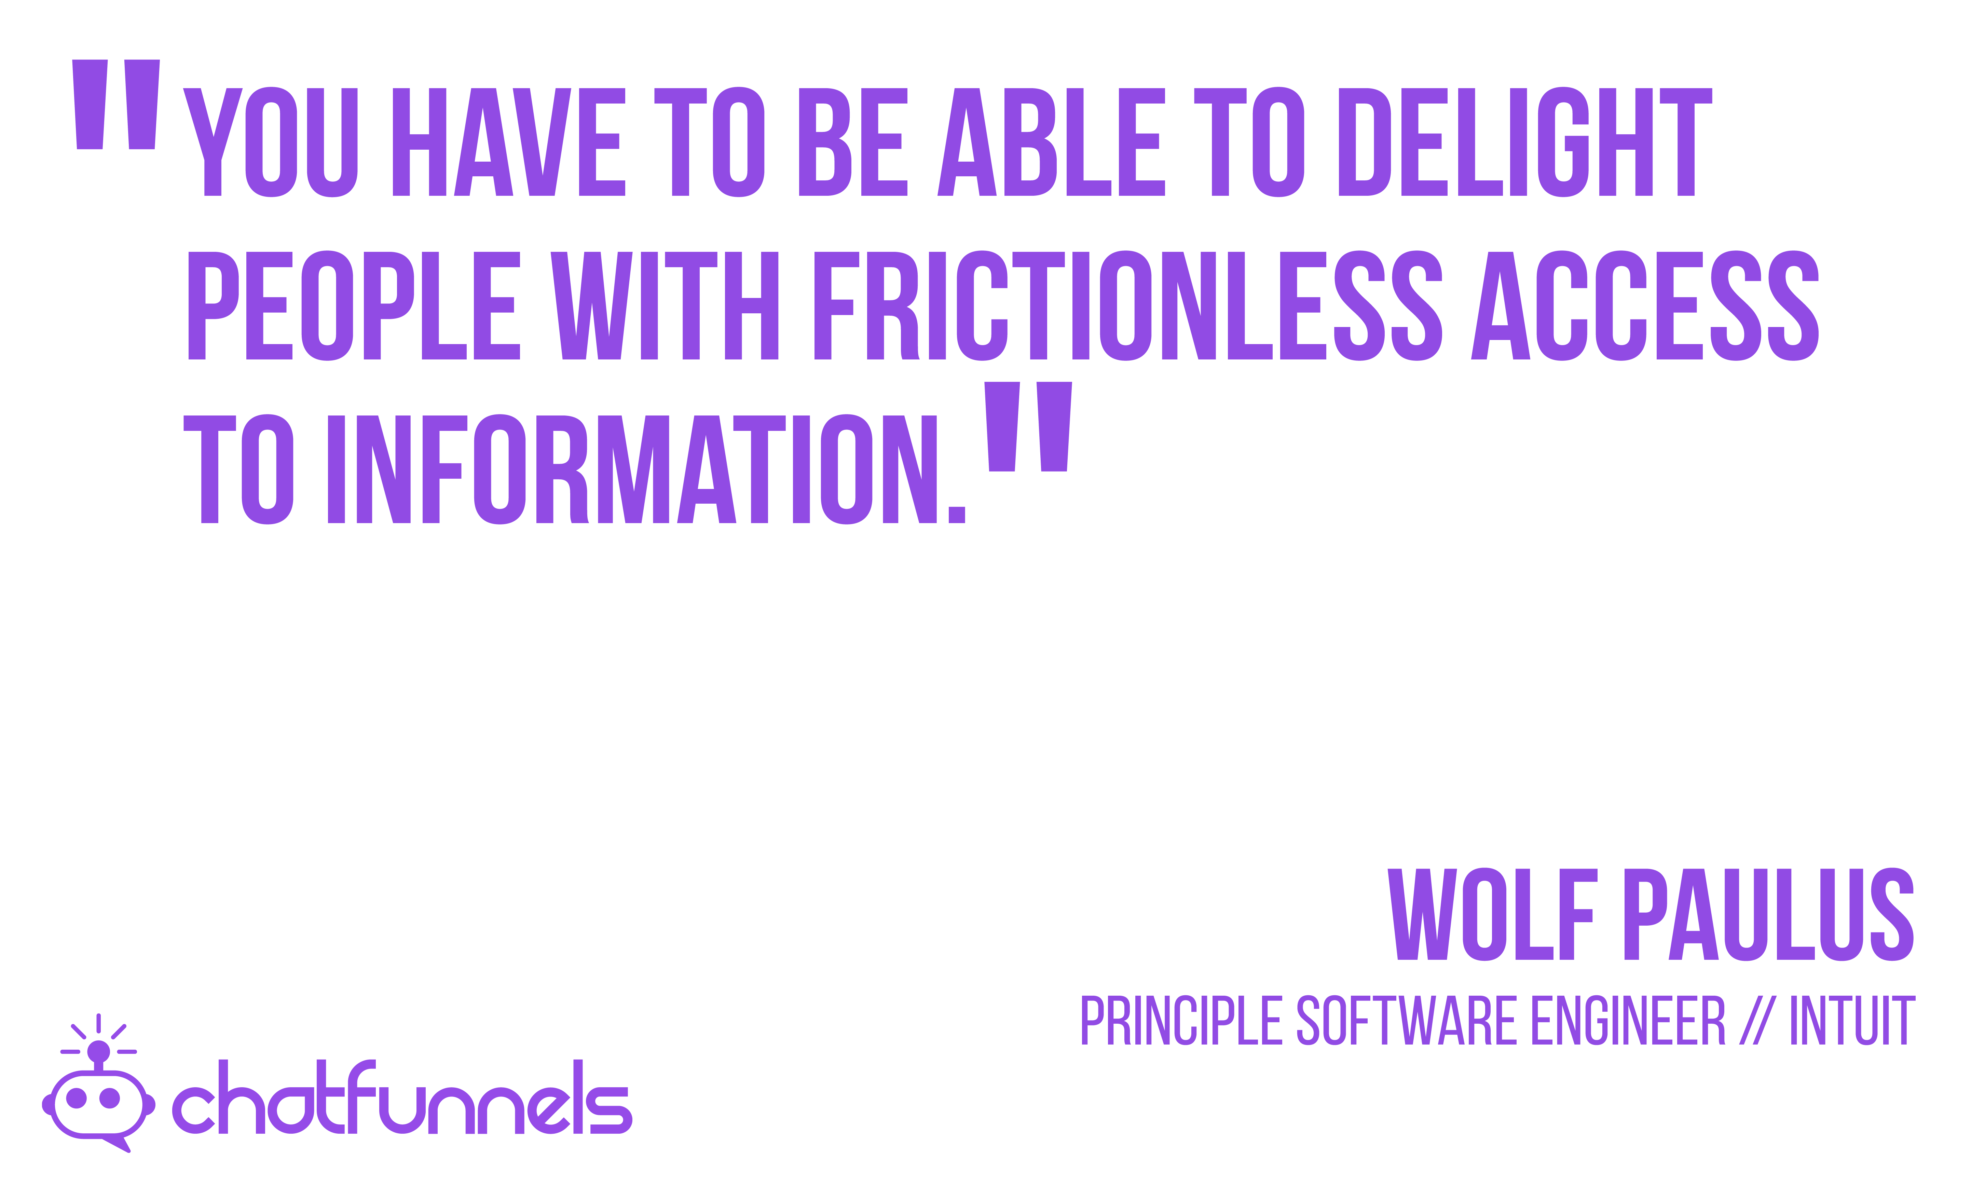 You have to be able to delight people with frictionless access to information